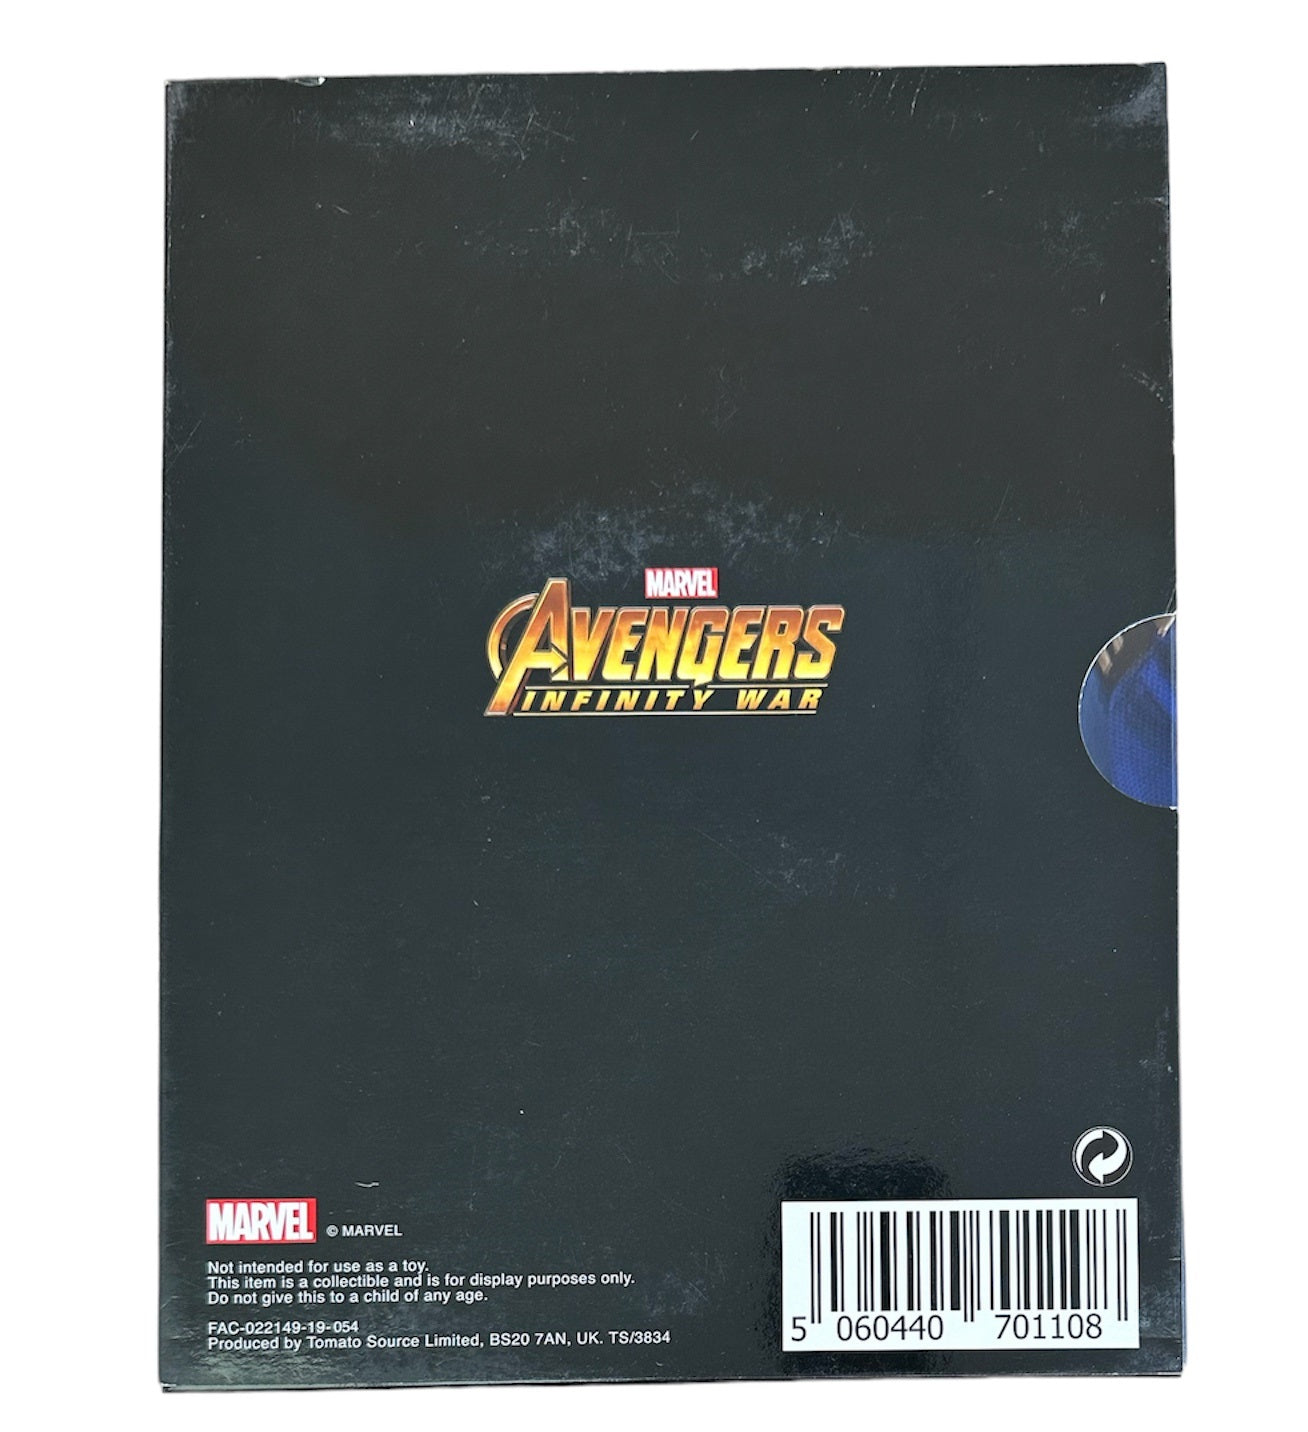 Vintage 2018 Marvel Avengers Infinity War Limited Edition Official Commemorative Coin Collection In Binder - Shop Stock Room Find